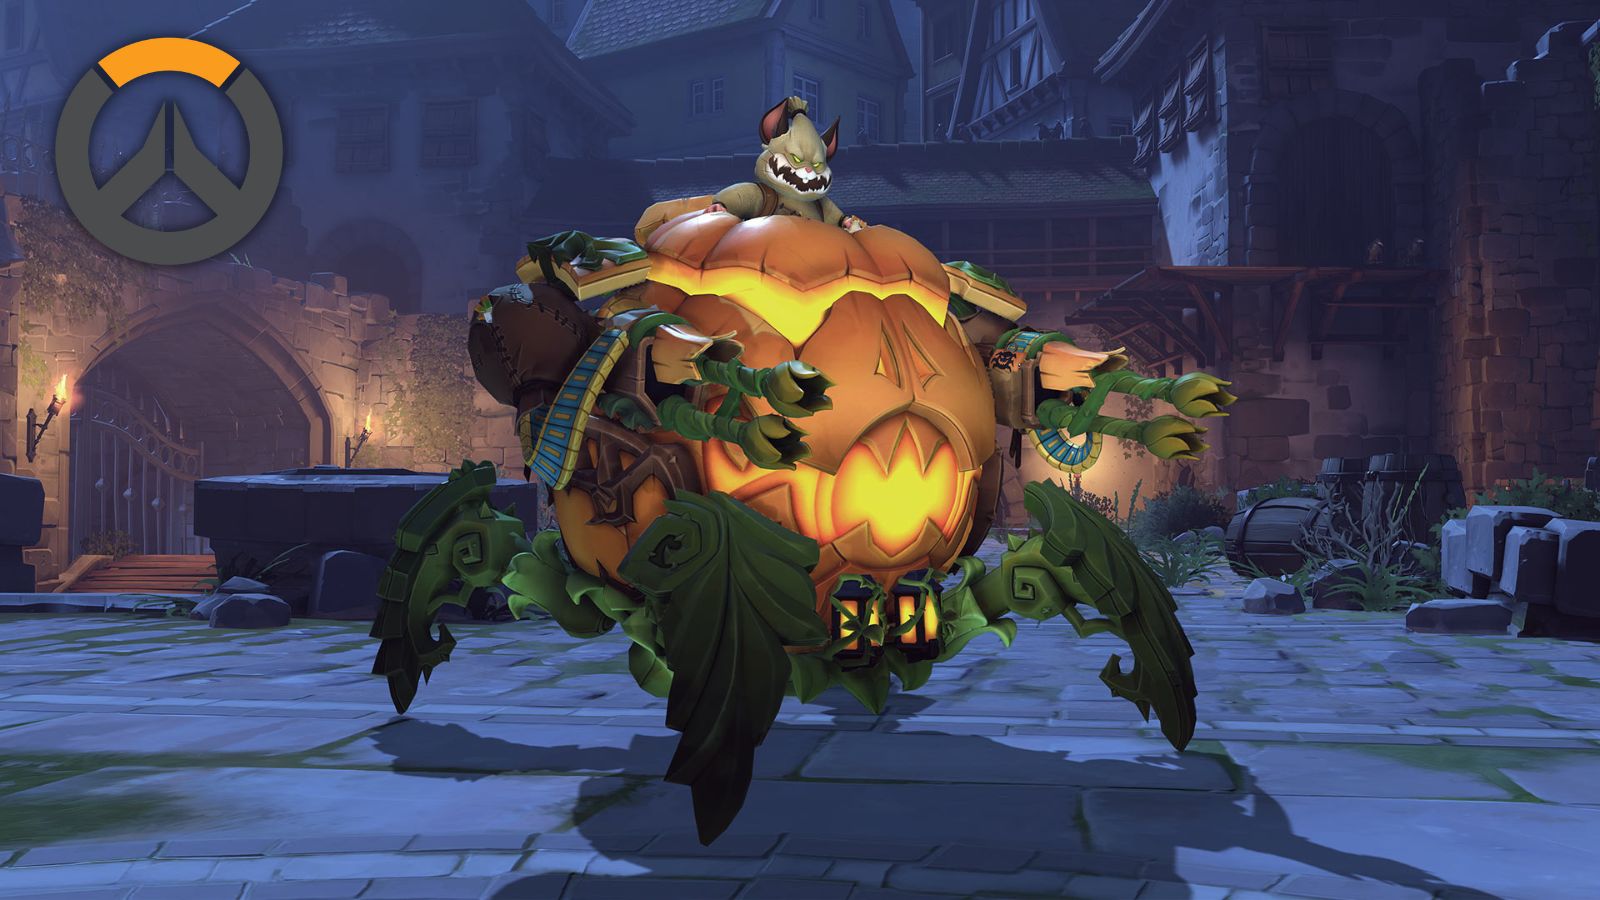 Classic Overwatch skins return in last chance to buy before Overwatch 2